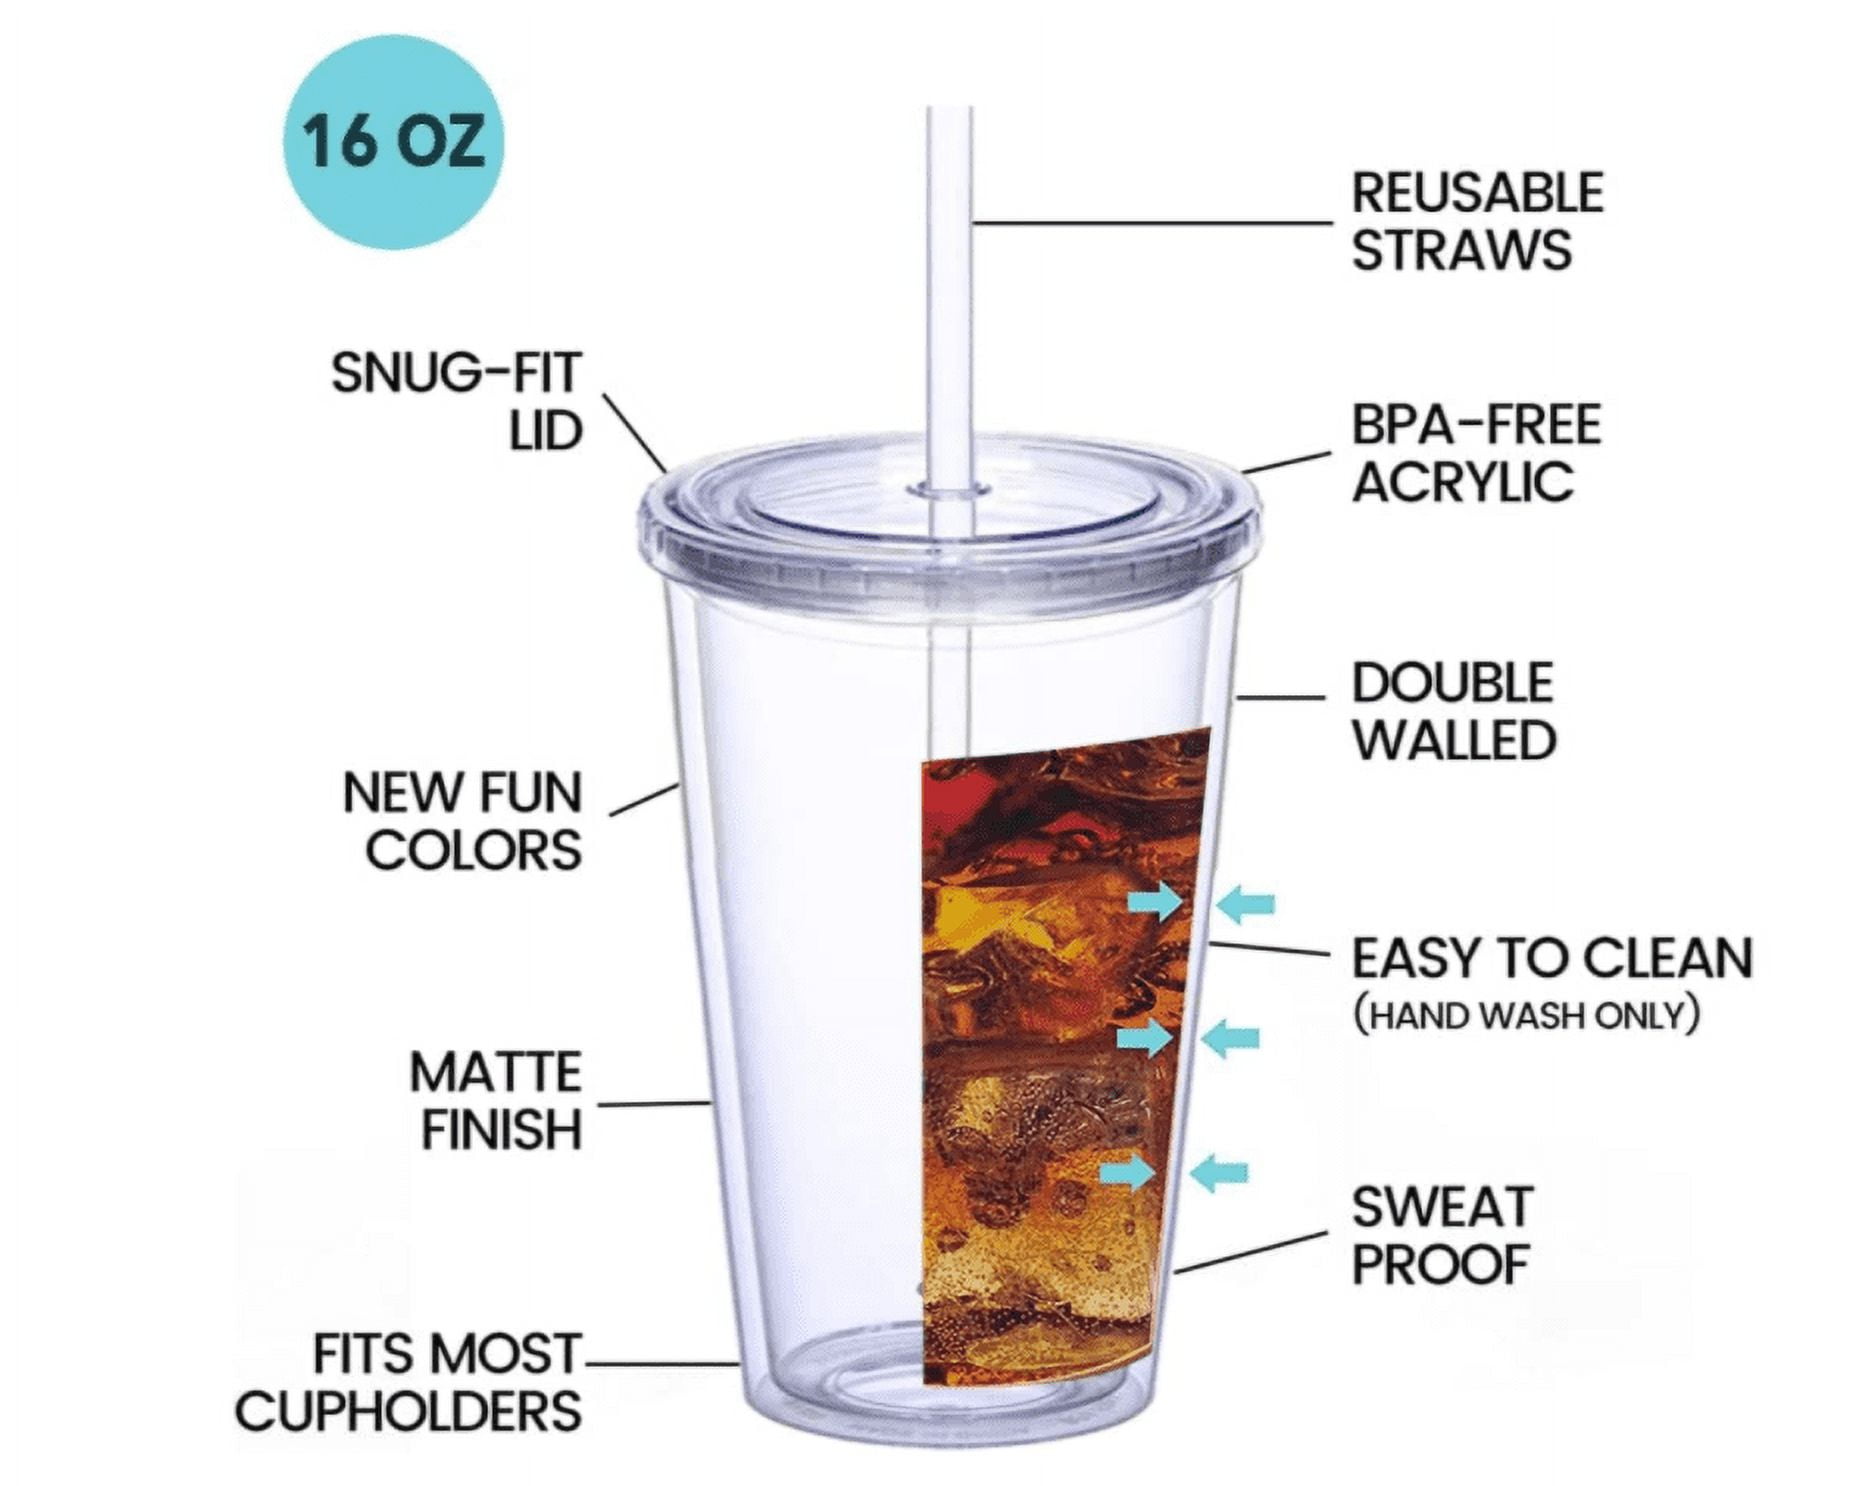 16 oz. Personalized Clear Acrylic Reusable Plastic Tumbler with Straw